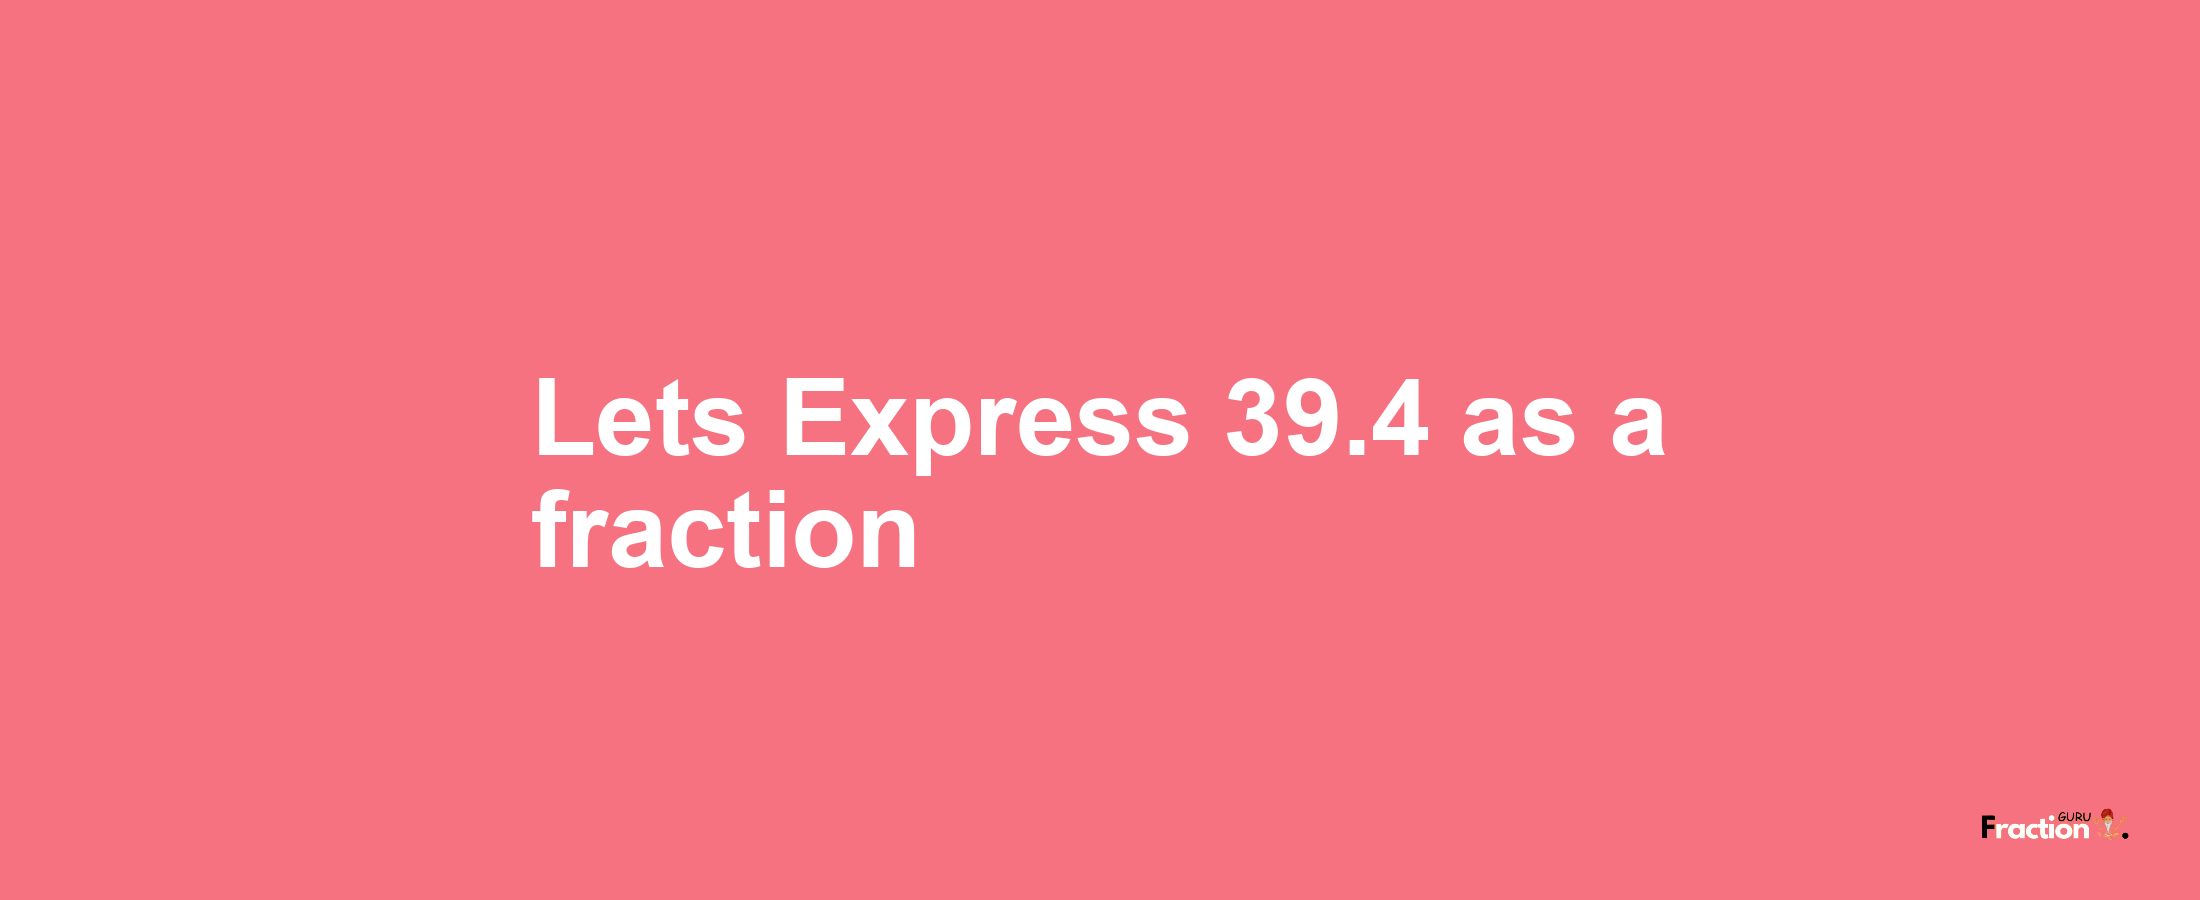 Lets Express 39.4 as afraction